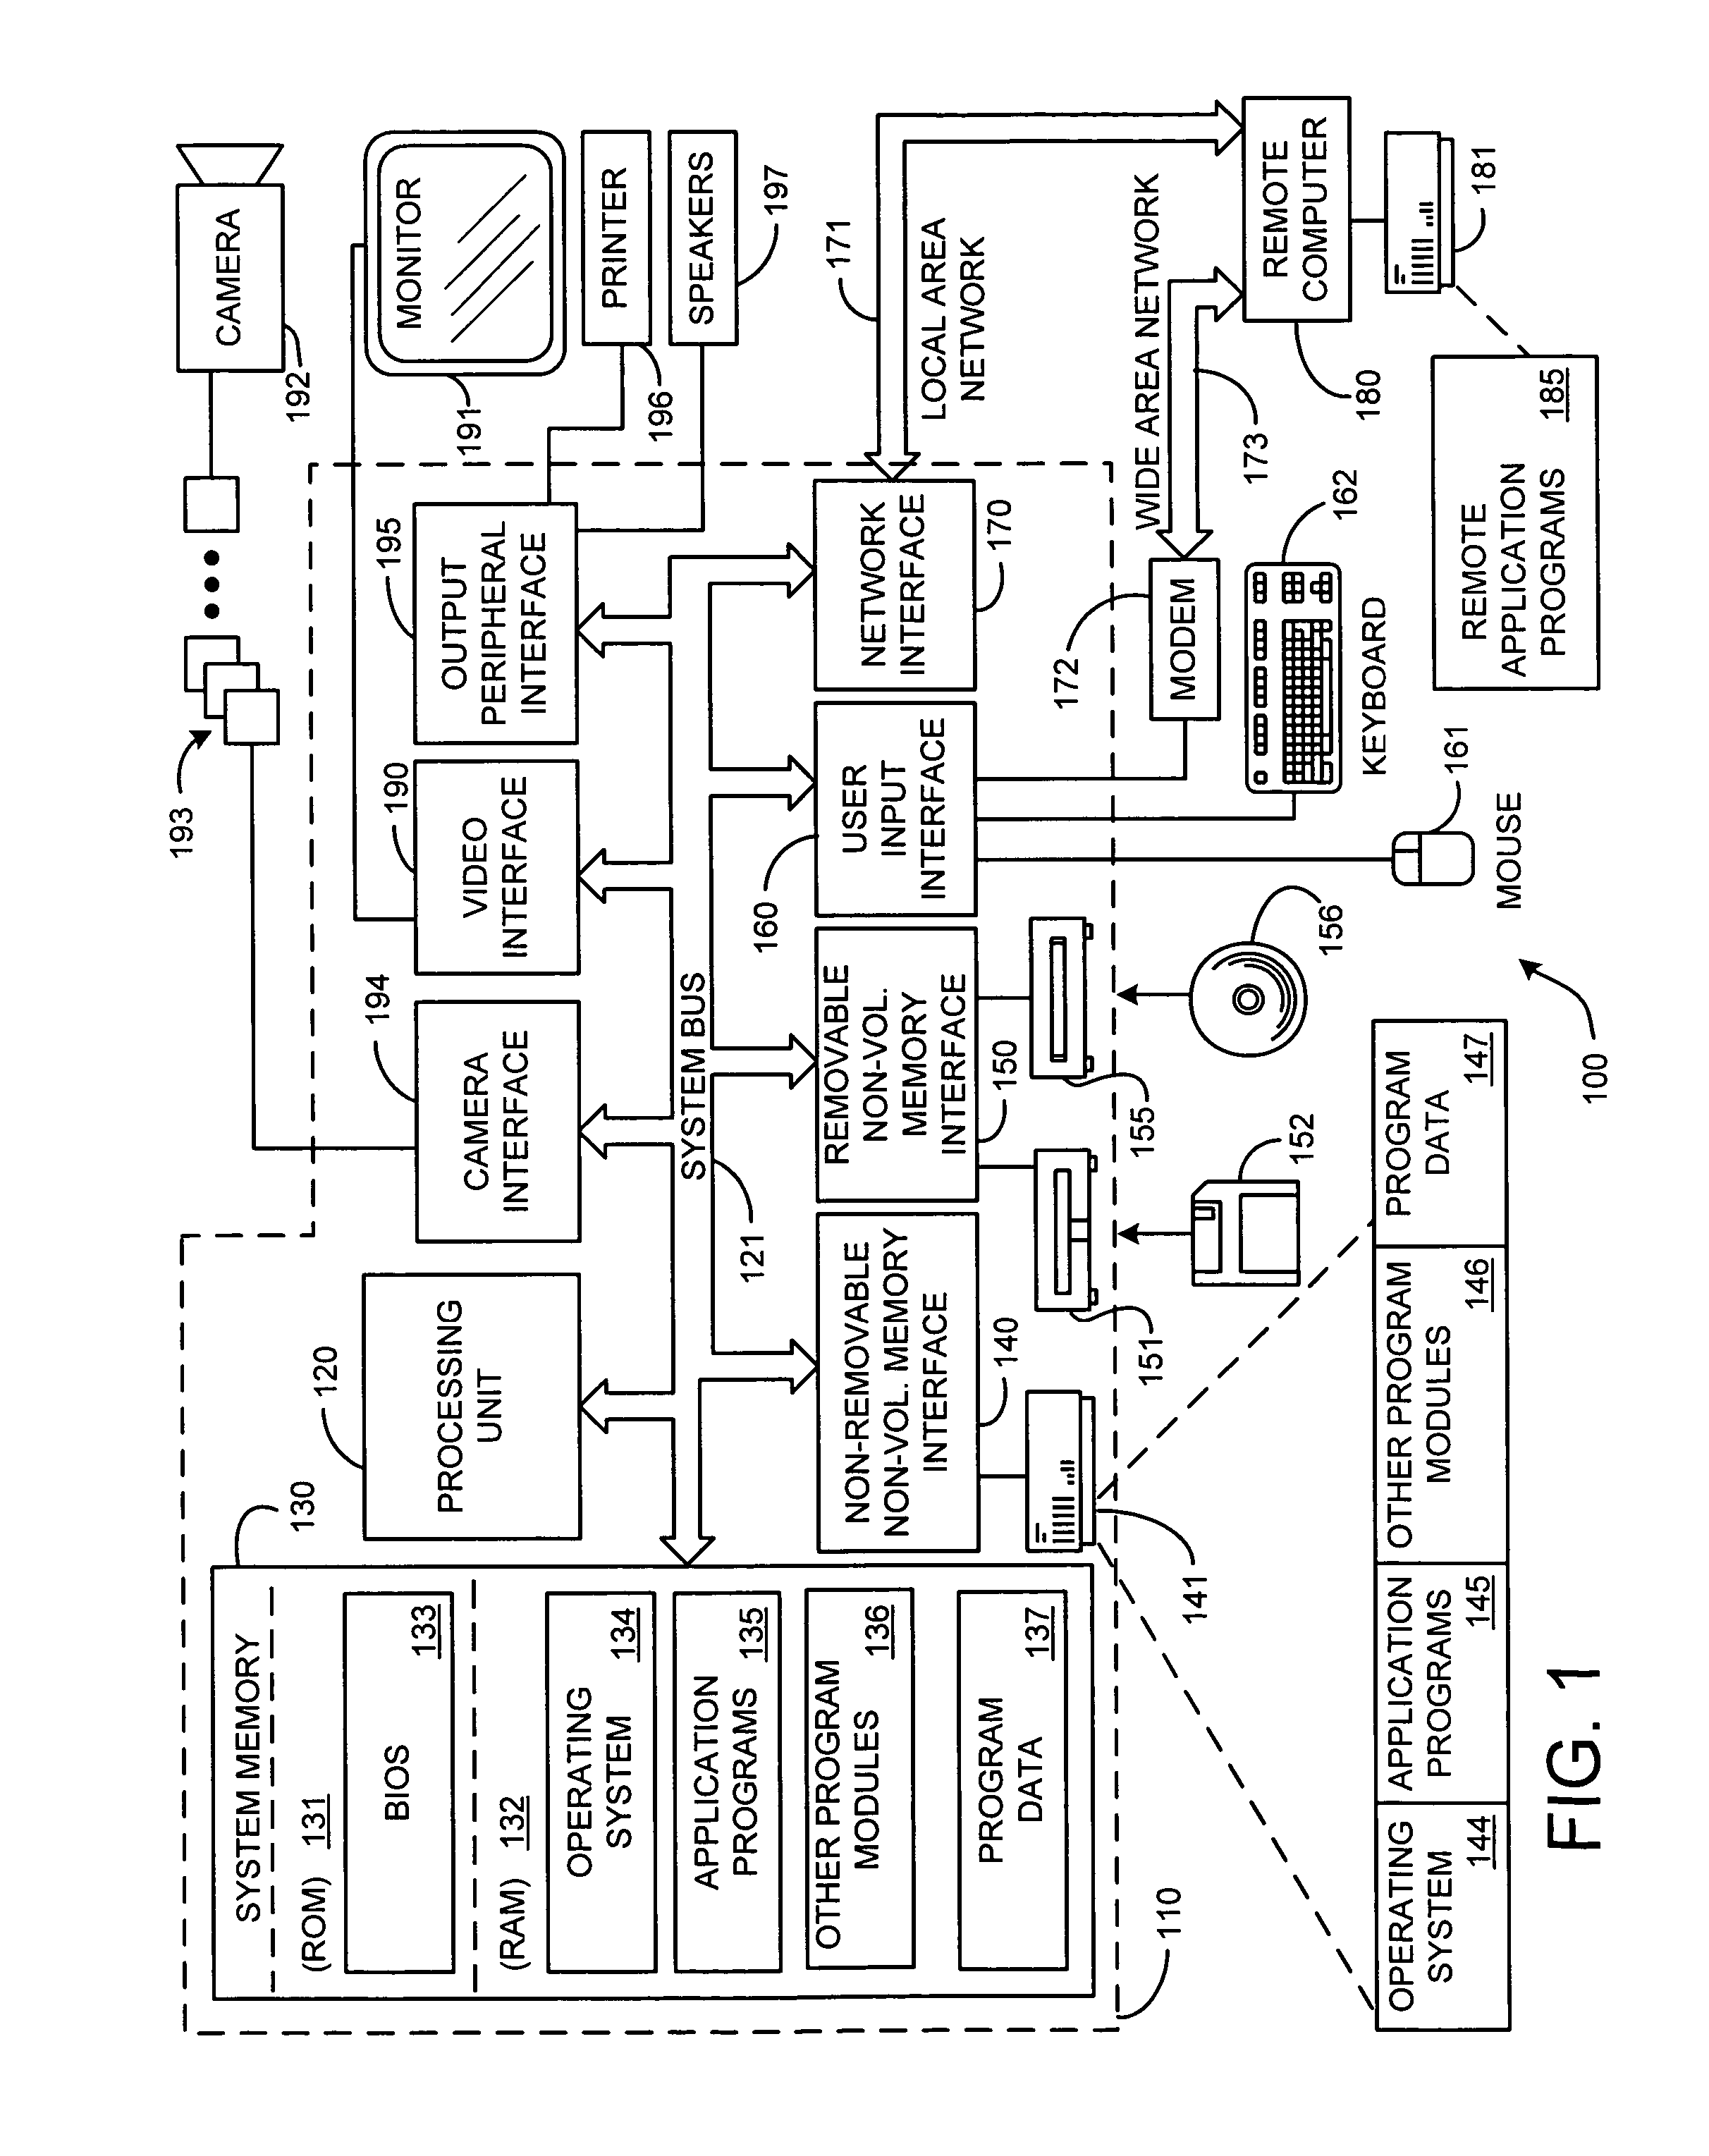 Graphical user interface system and process for navigating a set of images